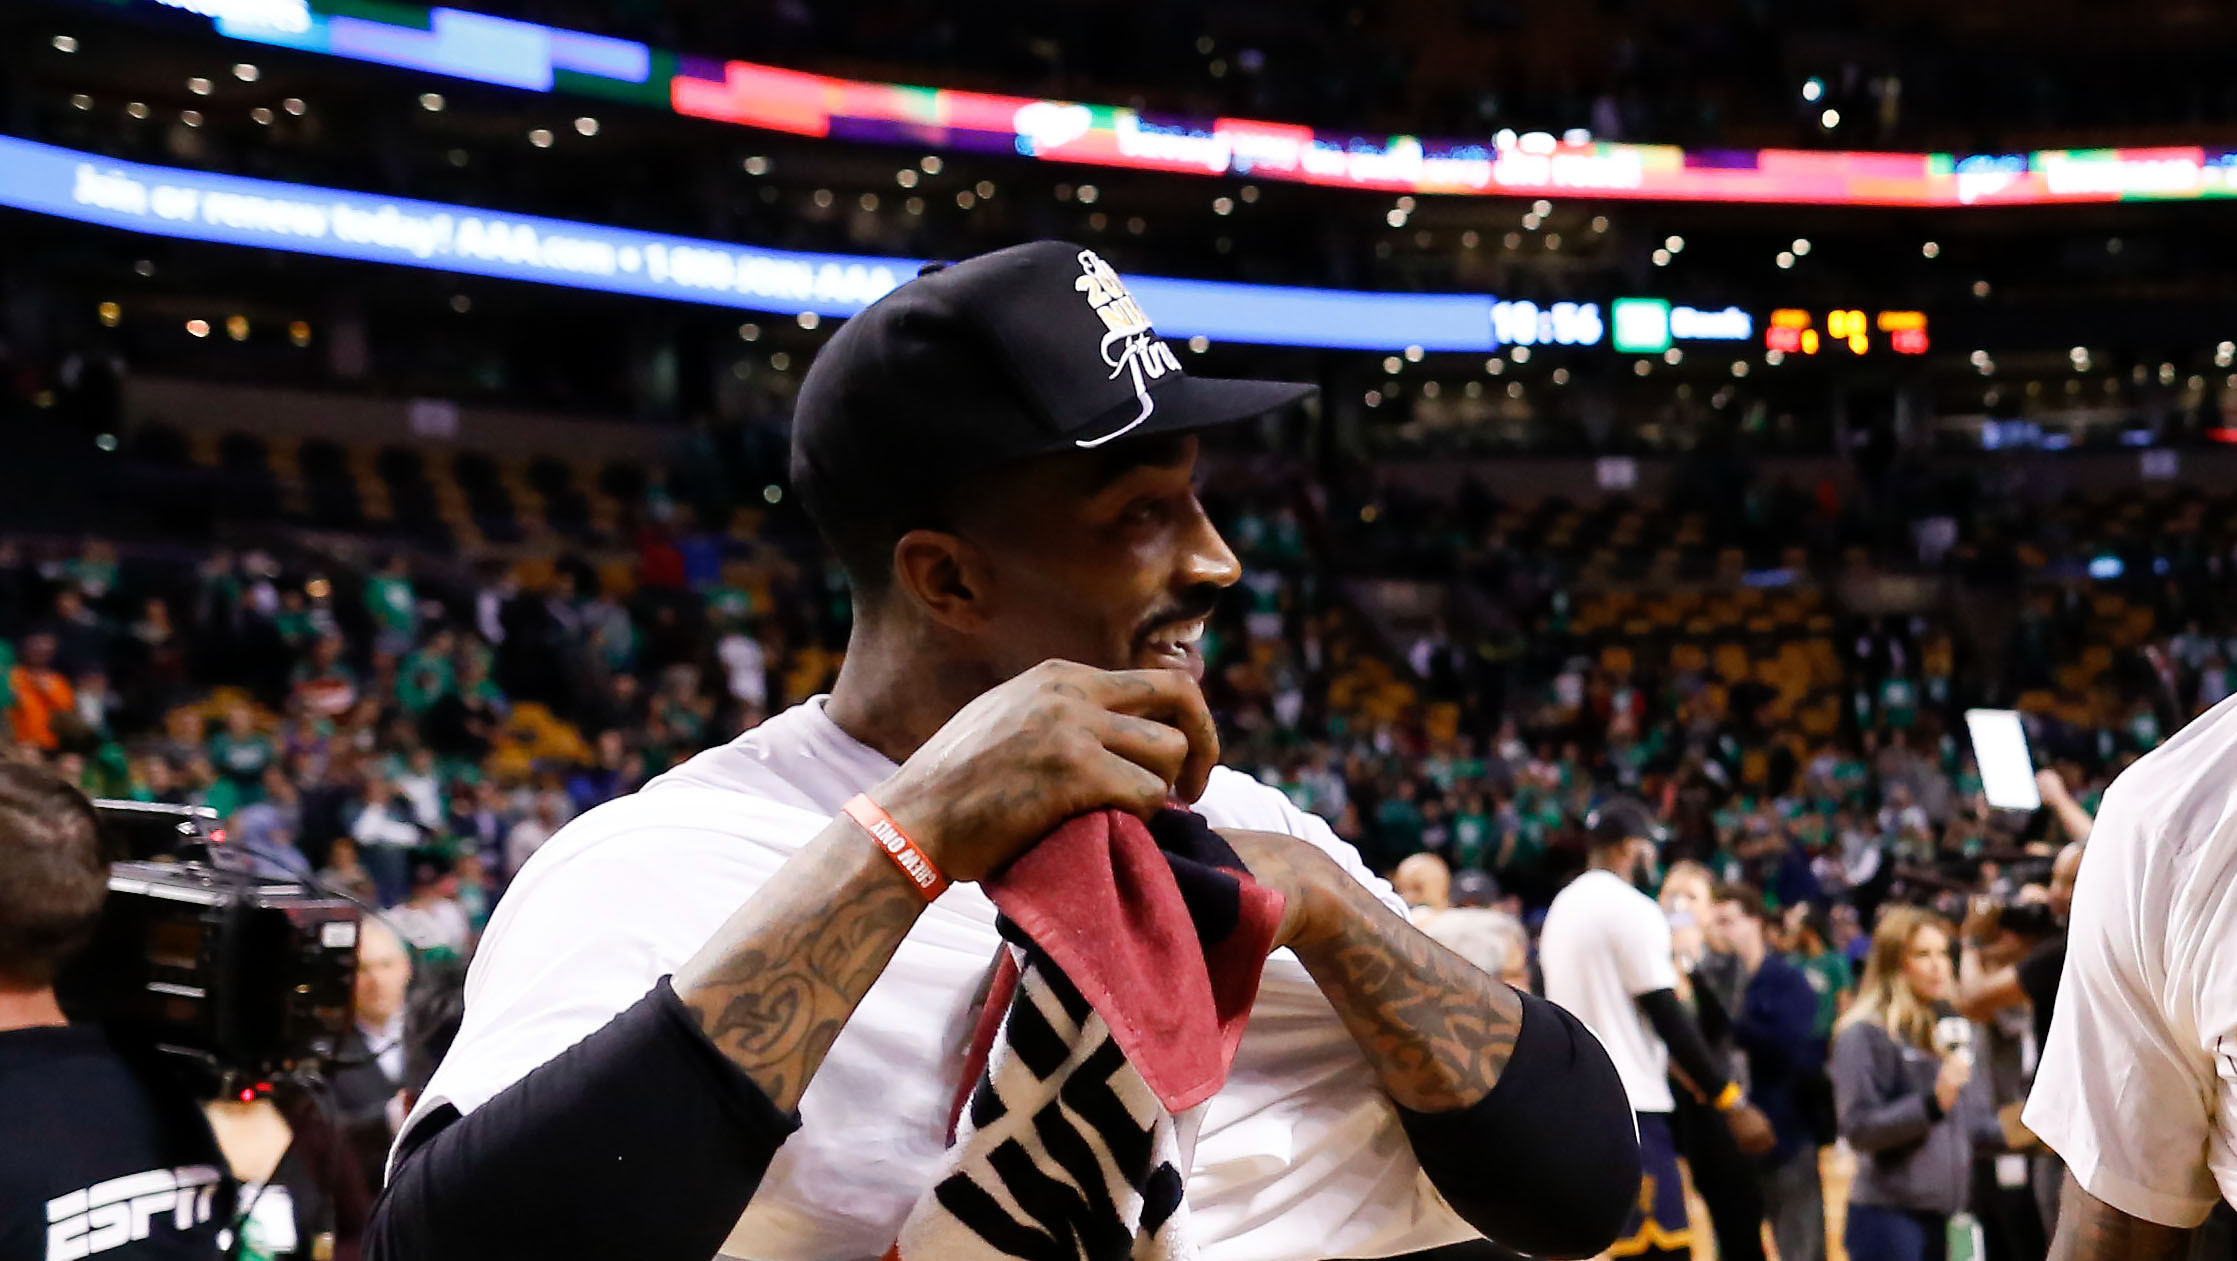 Everything Was Strange About Game 1 — Except The JR Smith Gaffe